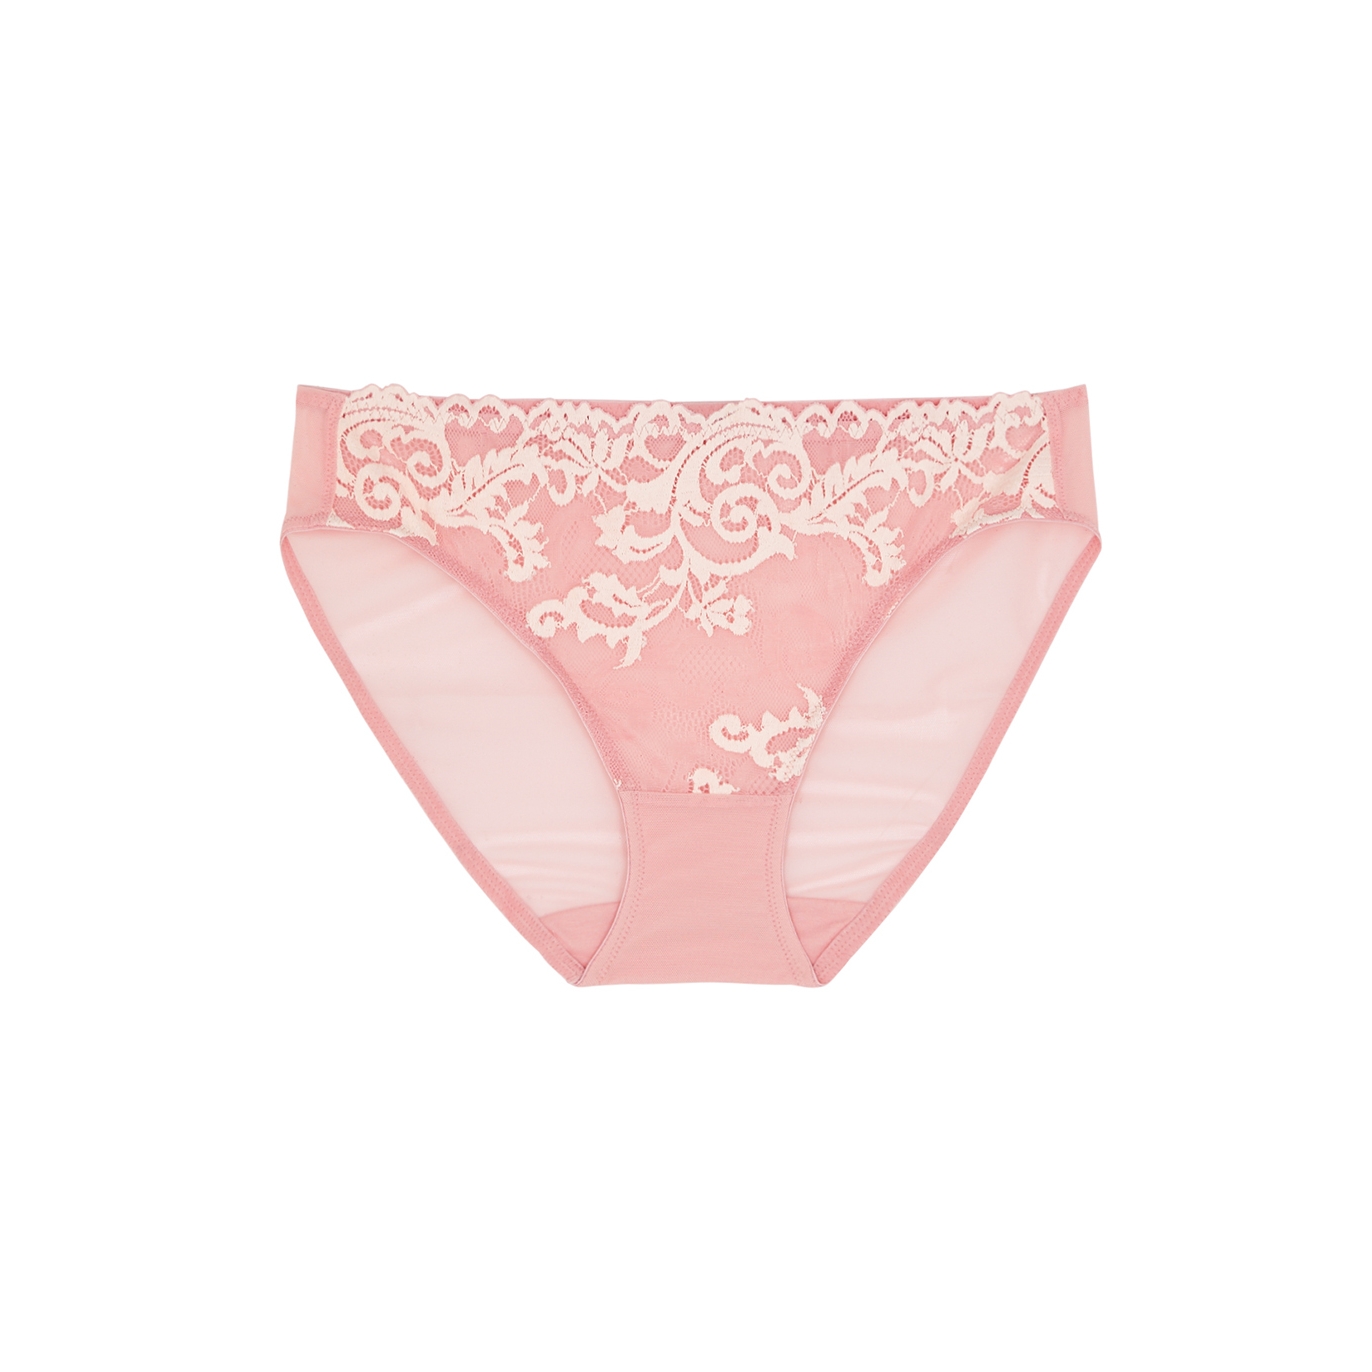 WACOAL INSTANT ICON LACE BRIEFS, LACE BRIEFS, PINK